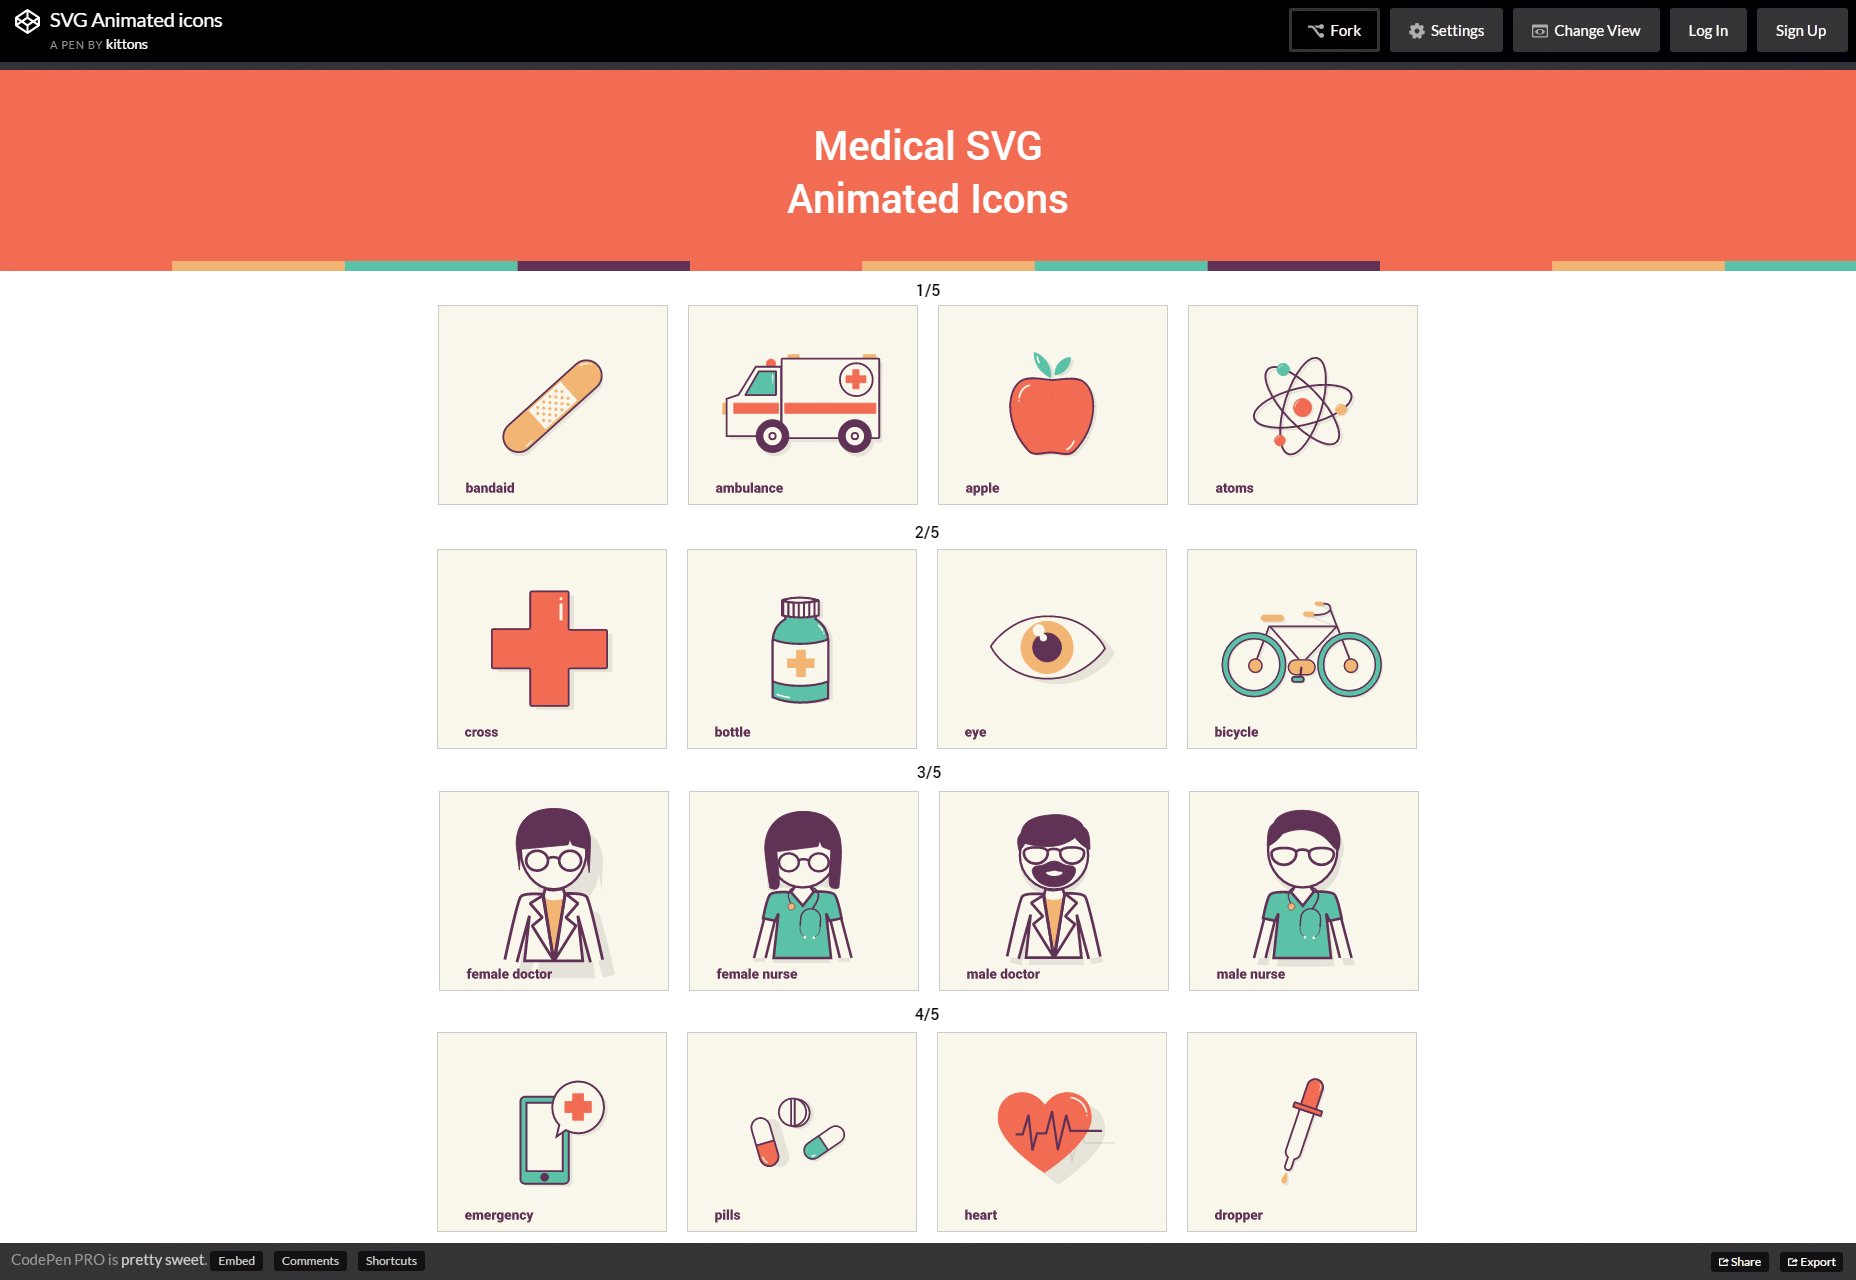 svg-animated-medical-icons